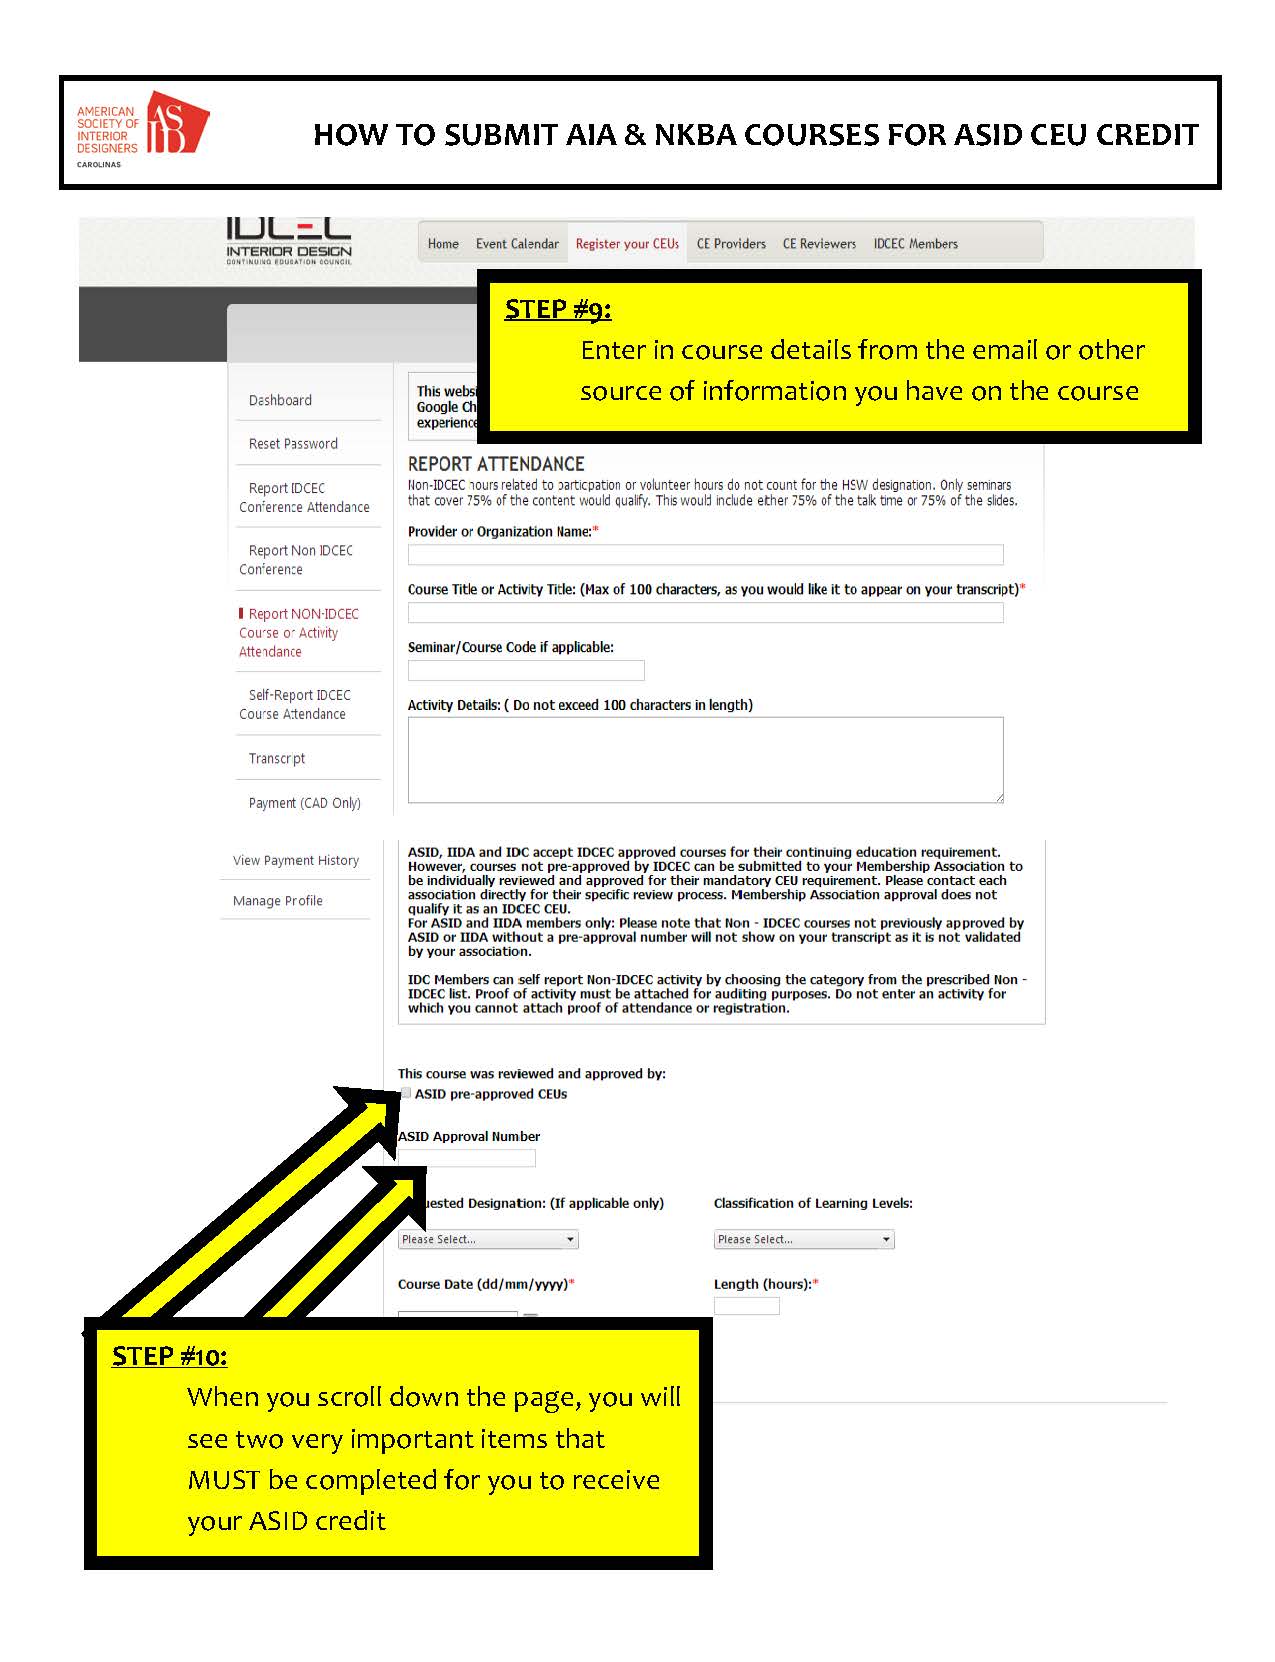 HOW TO SUBMIT AIA  NKBA COURSES FOR ASID CEU CREDIT Page 05